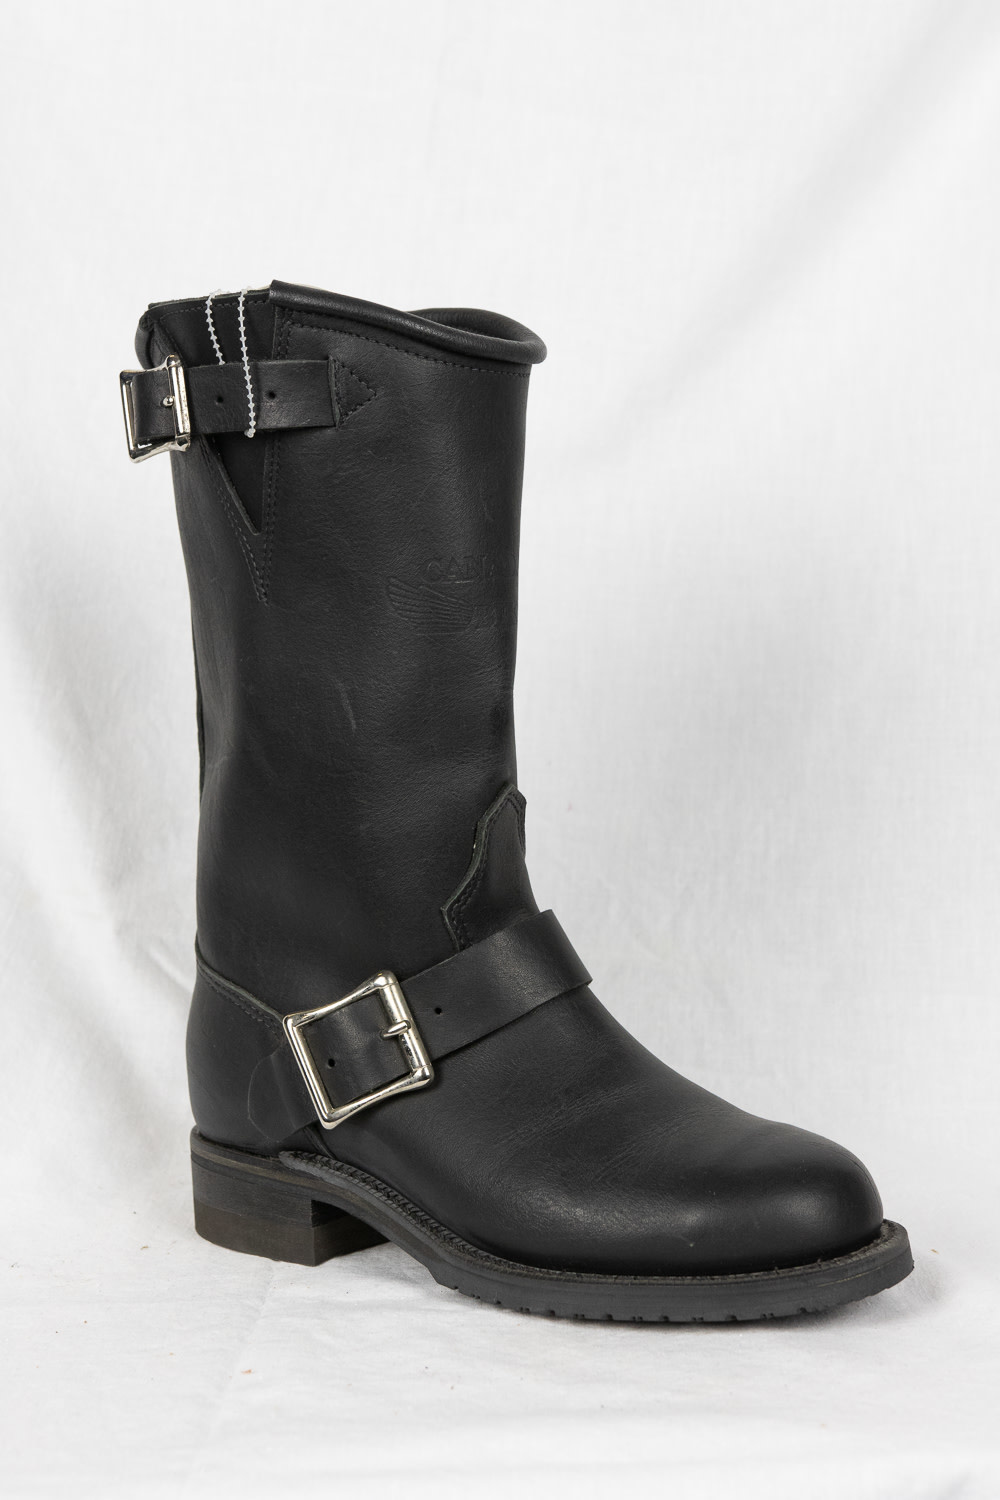 black leather boots canada